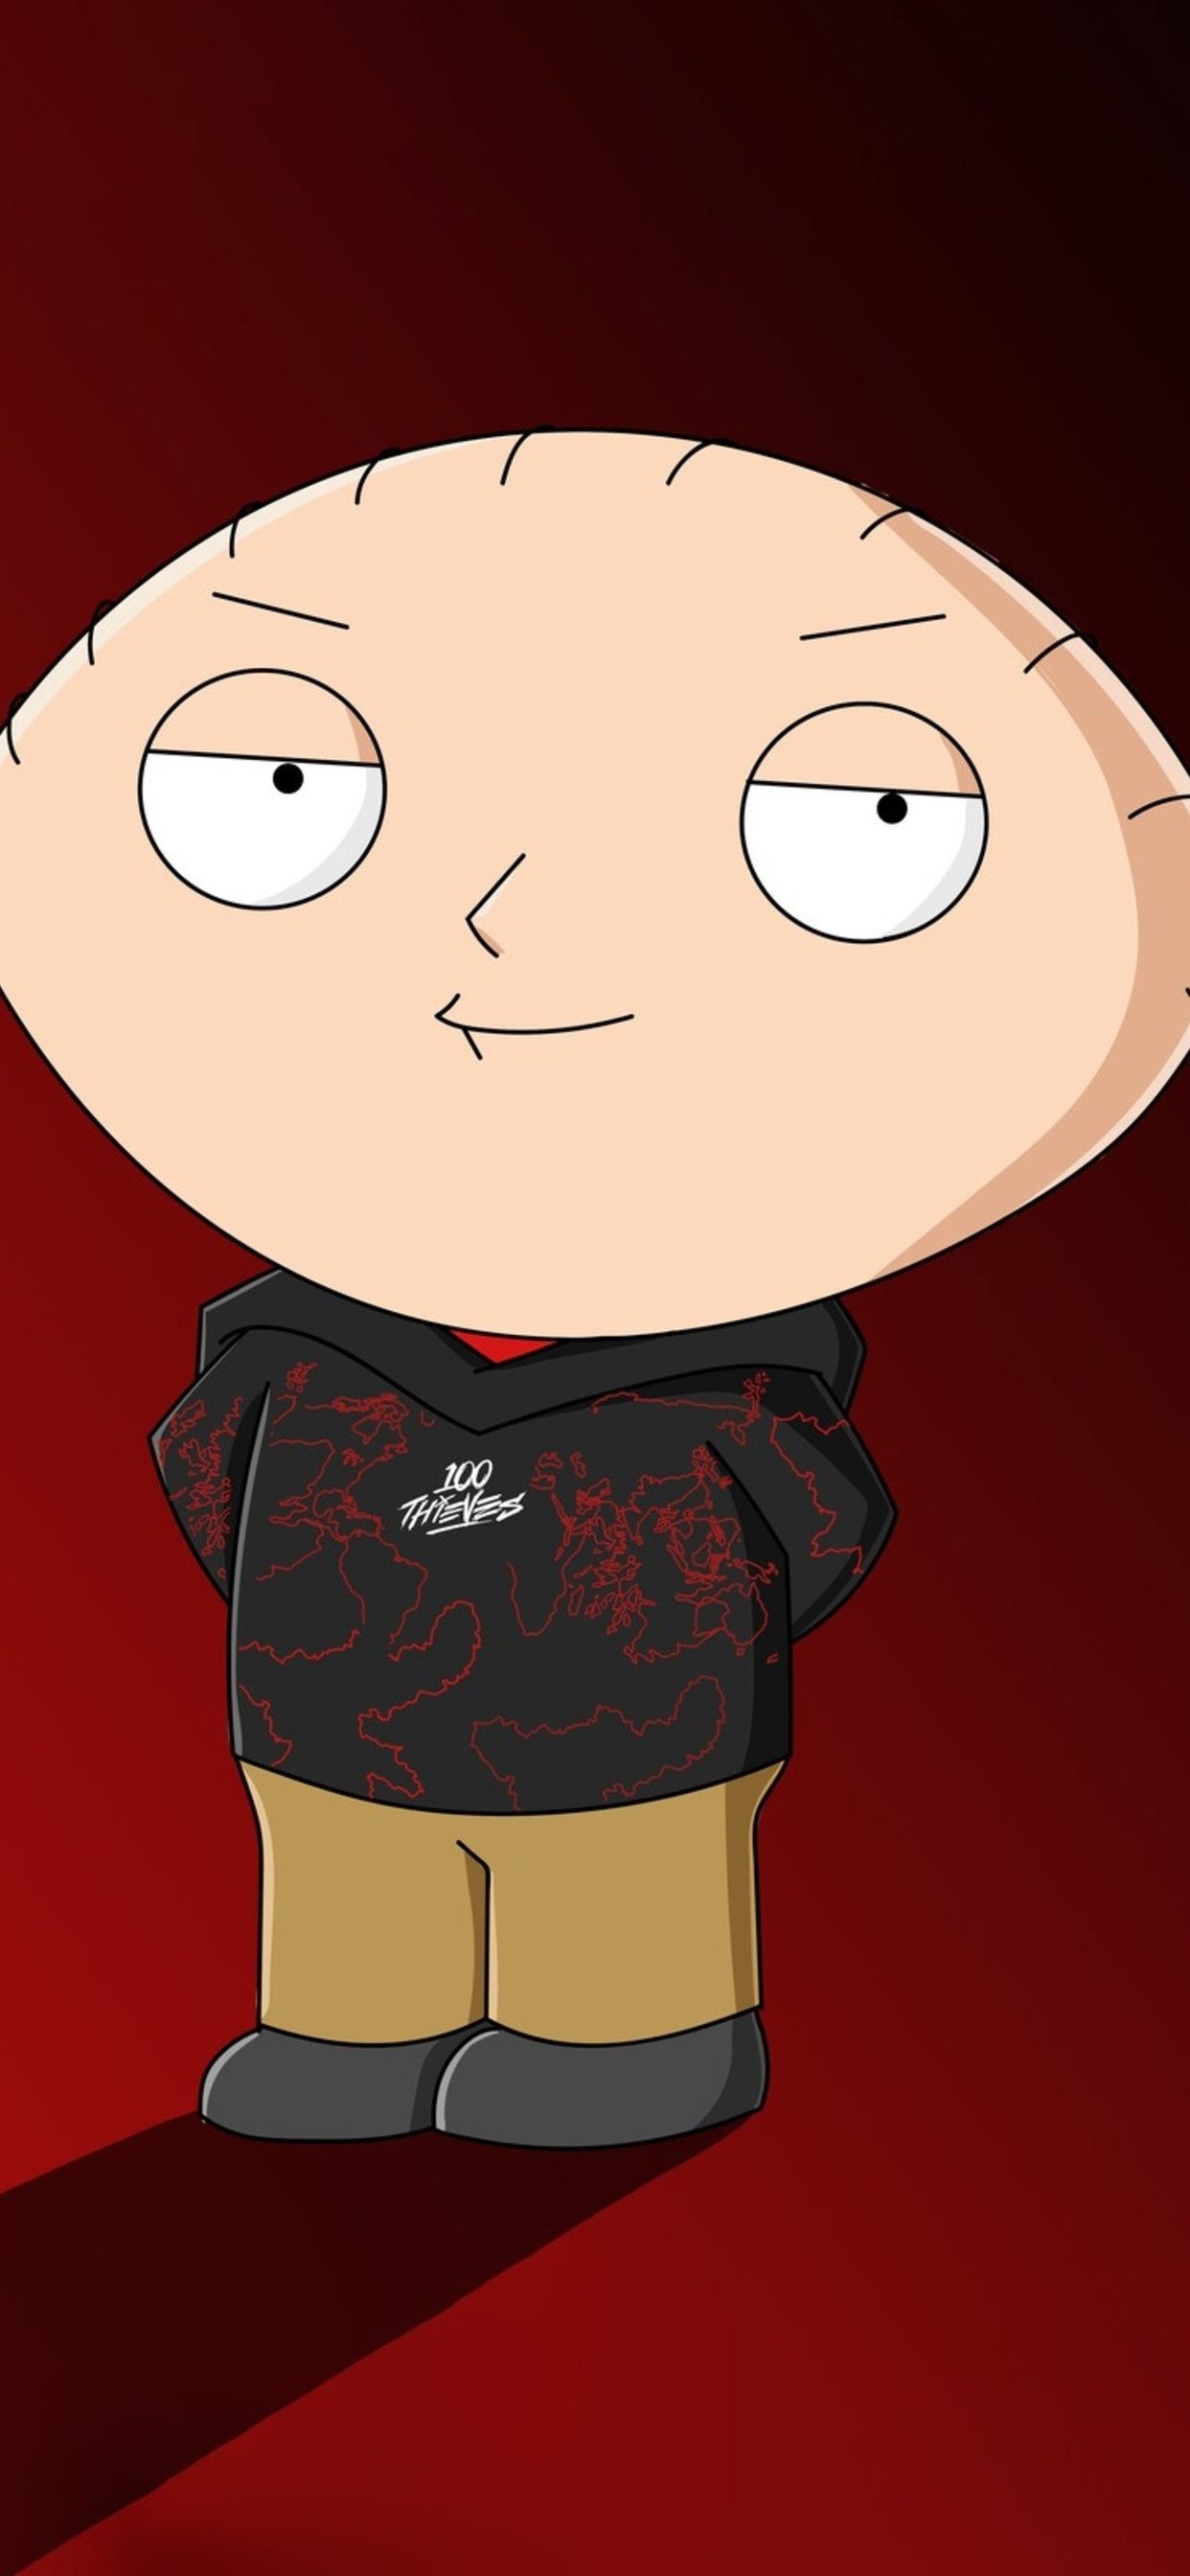 Stewie Griffin HD Phone Wallpapers - Wallpaper Cave